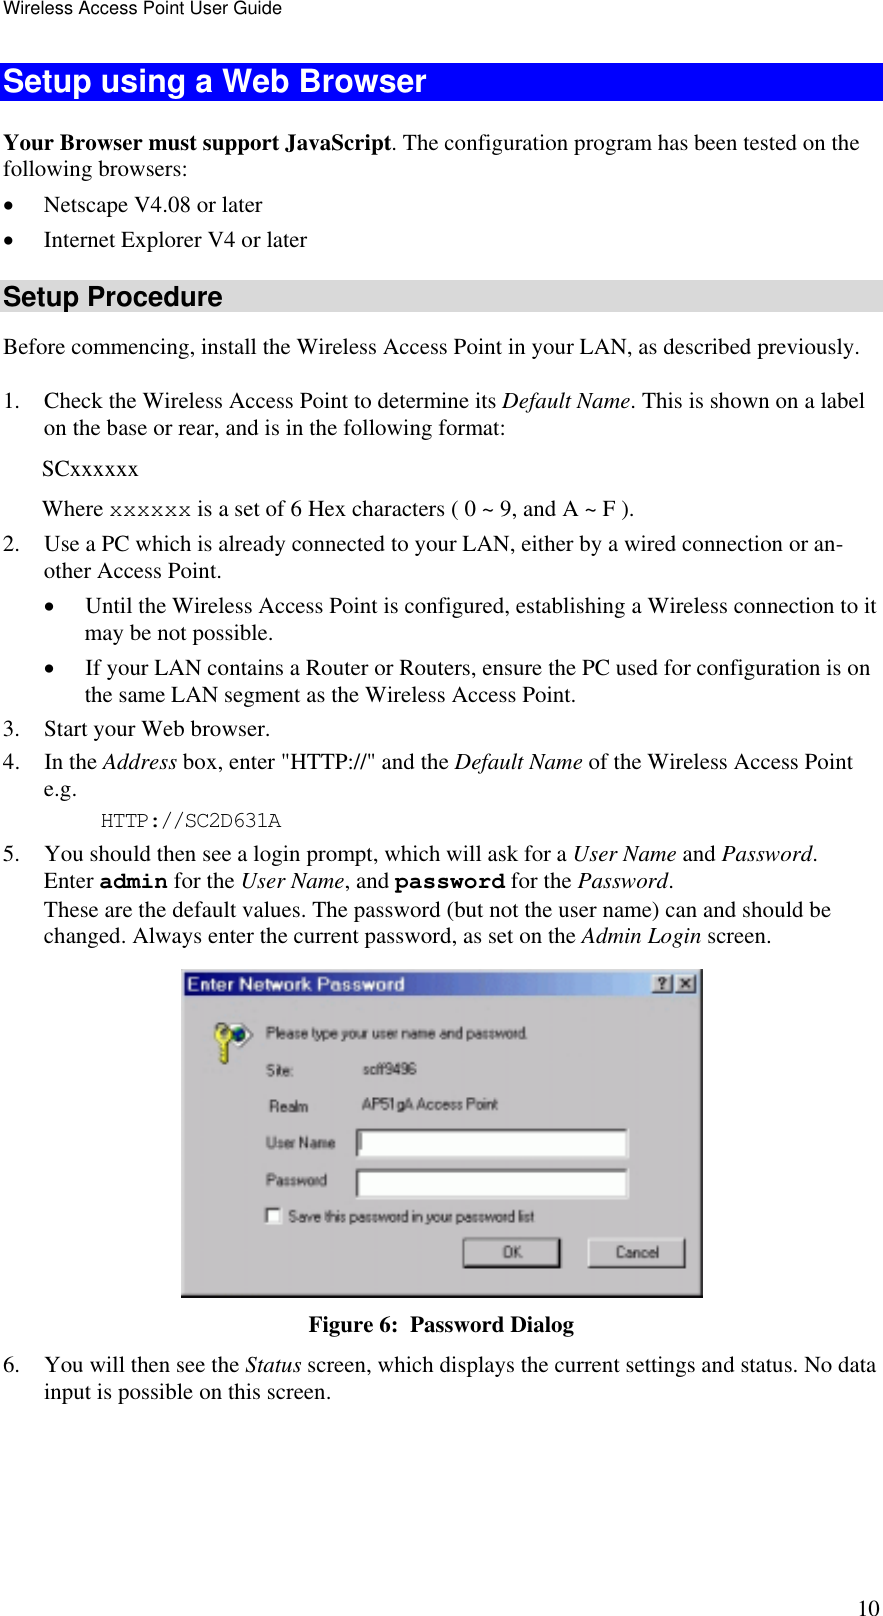 Wireless Access Point User Guide 10 Setup using a Web Browser Your Browser must support JavaScript. The configuration program has been tested on the following browsers: •  Netscape V4.08 or later •  Internet Explorer V4 or later Setup Procedure Before commencing, install the Wireless Access Point in your LAN, as described previously. 1.  Check the Wireless Access Point to determine its Default Name. This is shown on a label on the base or rear, and is in the following format: SCxxxxxx Where xxxxxx is a set of 6 Hex characters ( 0 ~ 9, and A ~ F ). 2.  Use a PC which is already connected to your LAN, either by a wired connection or an-other Access Point.  •  Until the Wireless Access Point is configured, establishing a Wireless connection to it may be not possible. •  If your LAN contains a Router or Routers, ensure the PC used for configuration is on the same LAN segment as the Wireless Access Point. 3.  Start your Web browser. 4. In the Address box, enter &quot;HTTP://&quot; and the Default Name of the Wireless Access Point  e.g. HTTP://SC2D631A 5.  You should then see a login prompt, which will ask for a User Name and Password.  Enter admin for the User Name, and password for the Password. These are the default values. The password (but not the user name) can and should be changed. Always enter the current password, as set on the Admin Login screen.  Figure 6:  Password Dialog 6.  You will then see the Status screen, which displays the current settings and status. No data input is possible on this screen. 